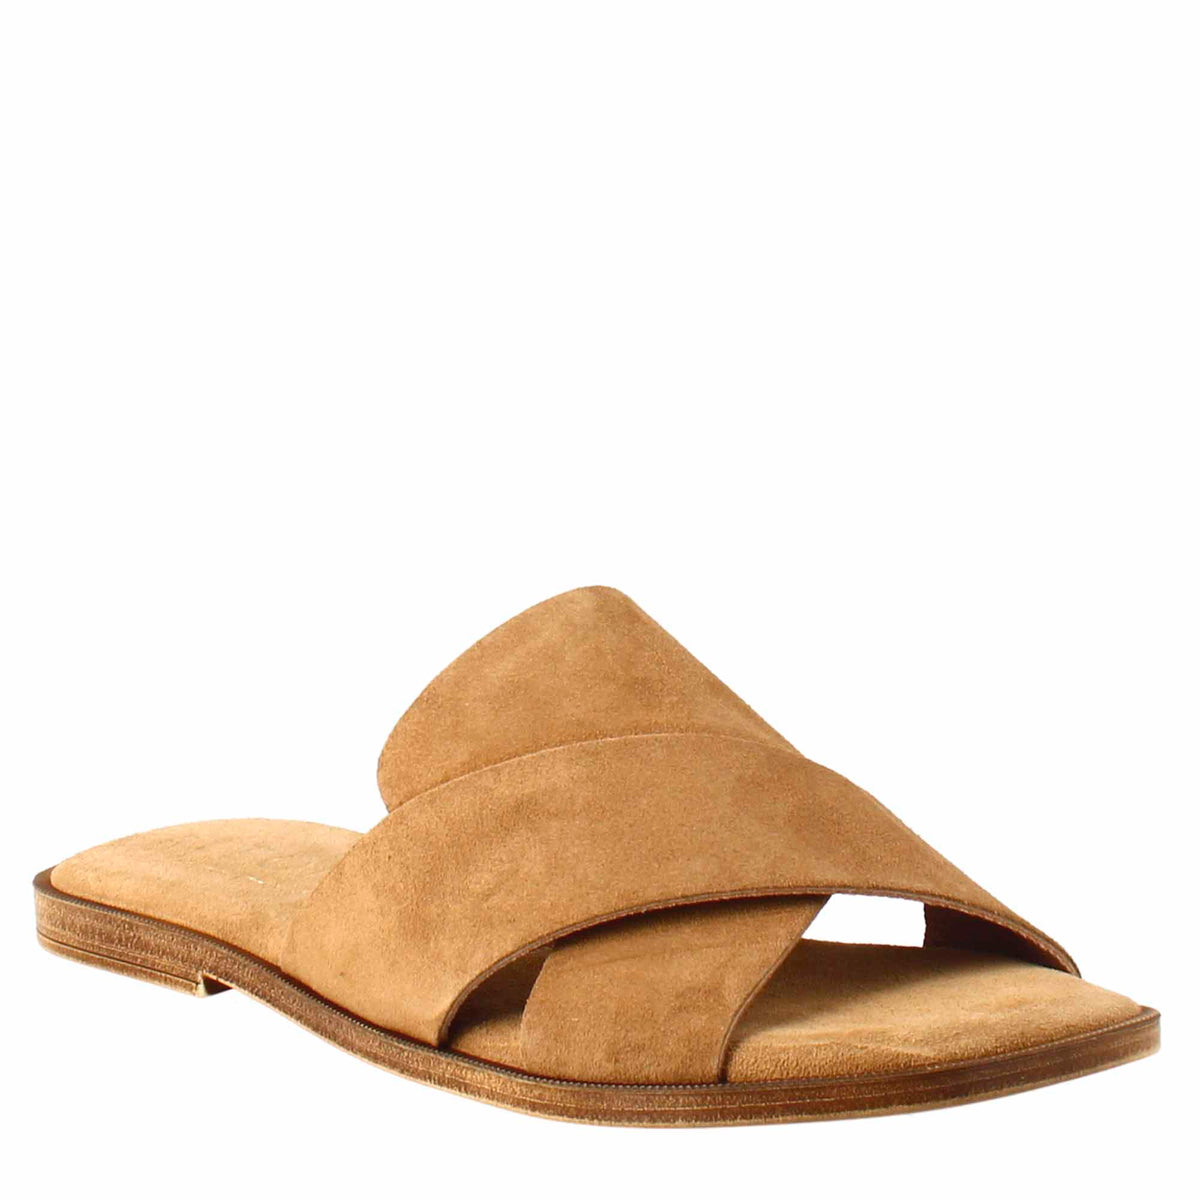 Women's double band sandal in brown suede